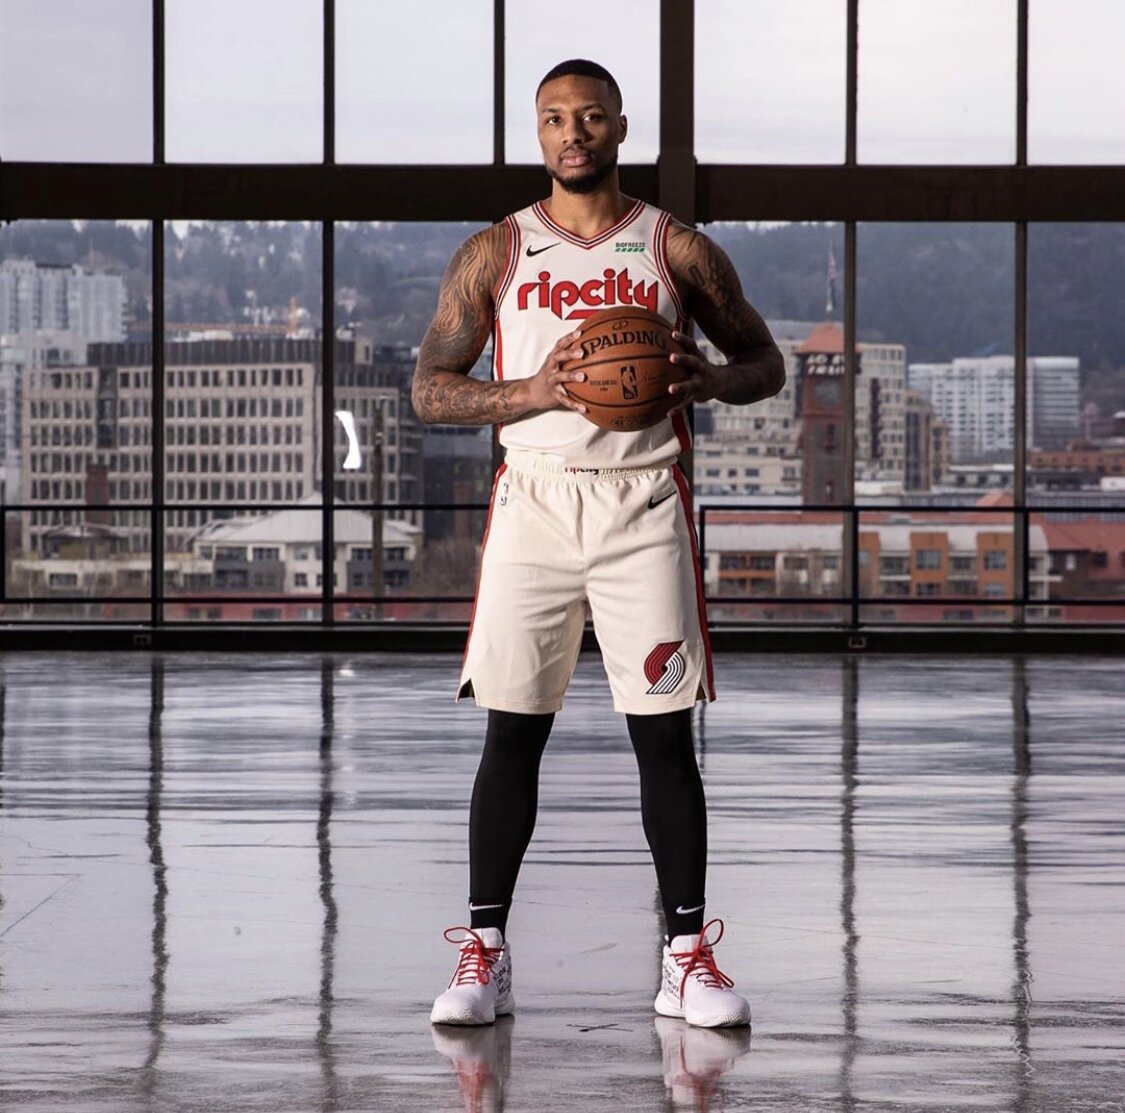 rip city sleeved jersey